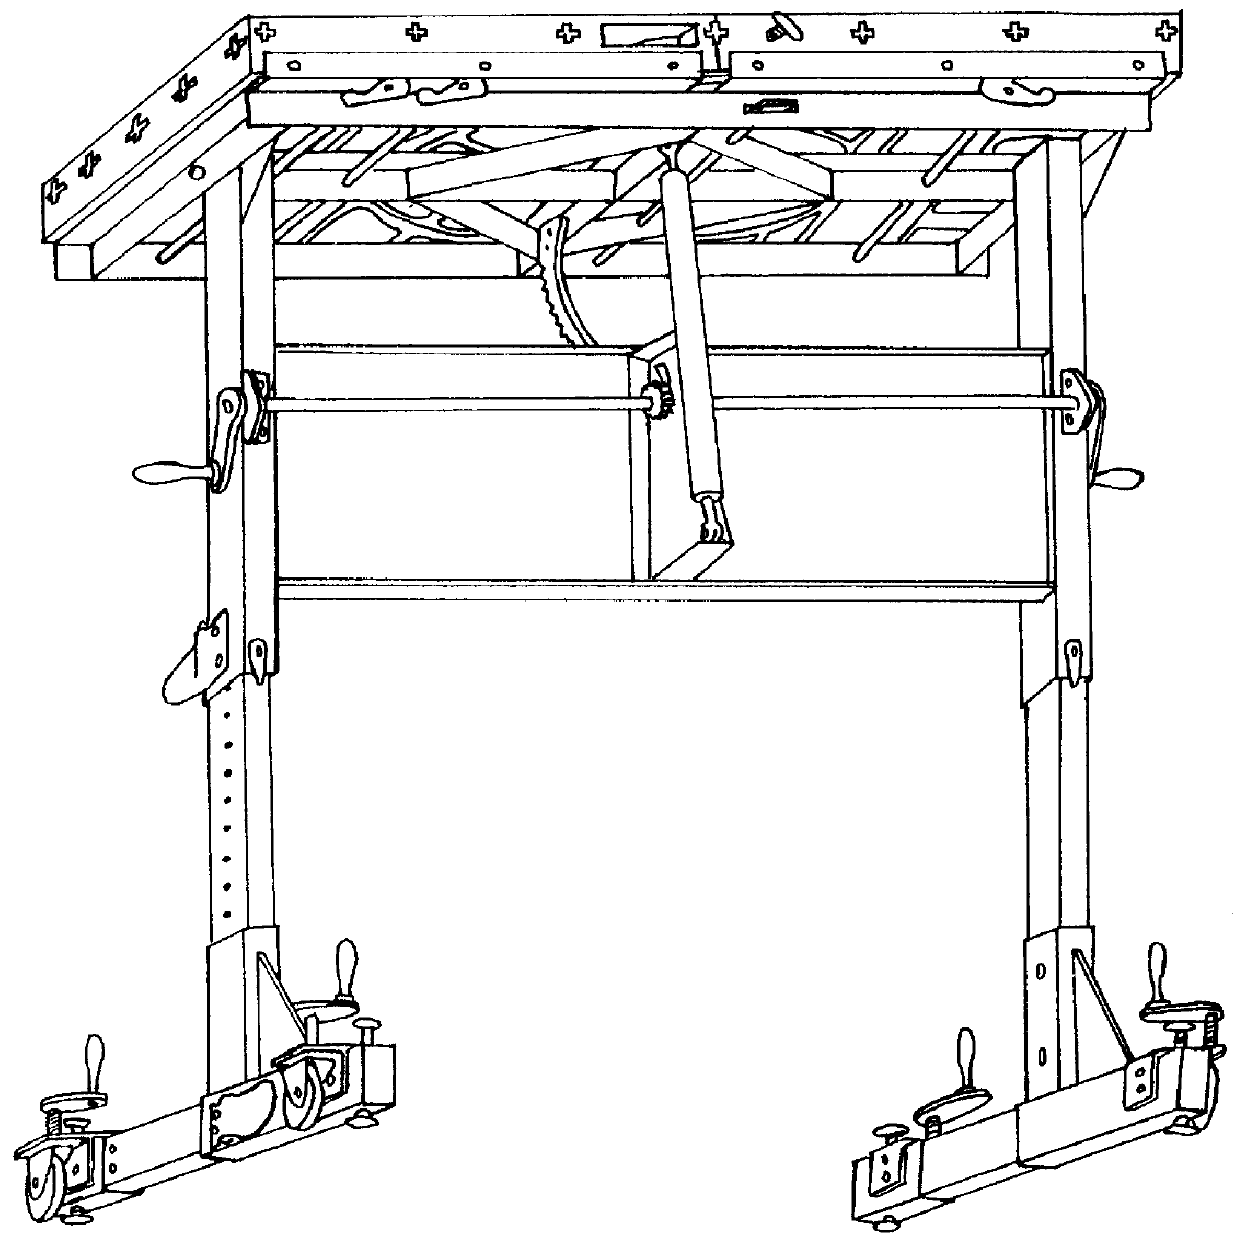 Clamping/securing/connecting system